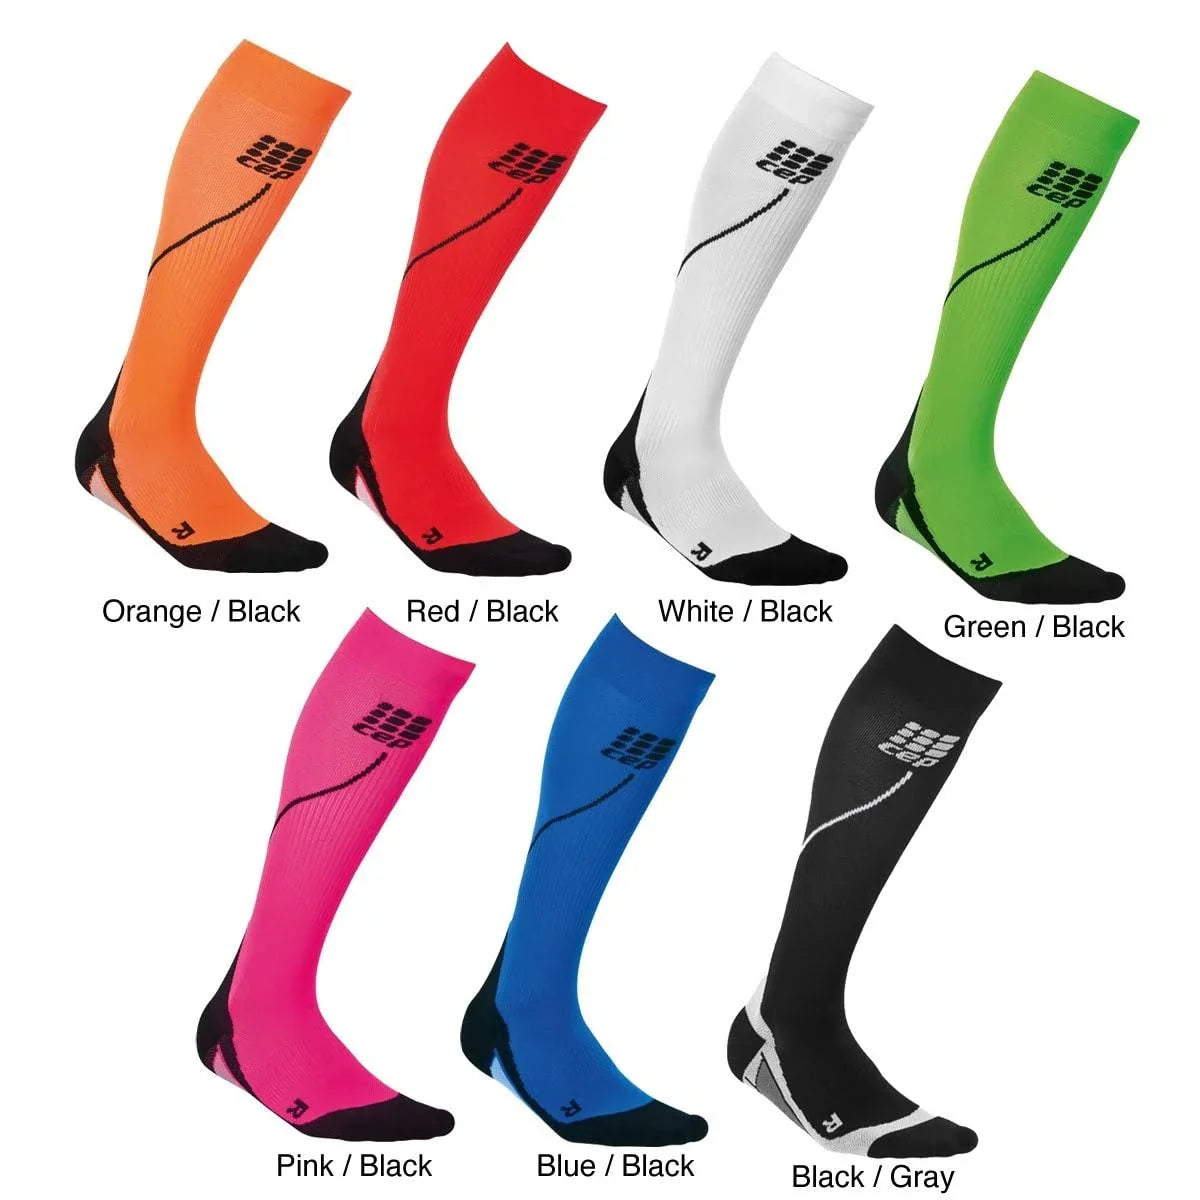 CEP The Run Compression Socks 4.0, Women's Size 4, 15.5-17.5" Circumference, Assorted Colors, 1/ea